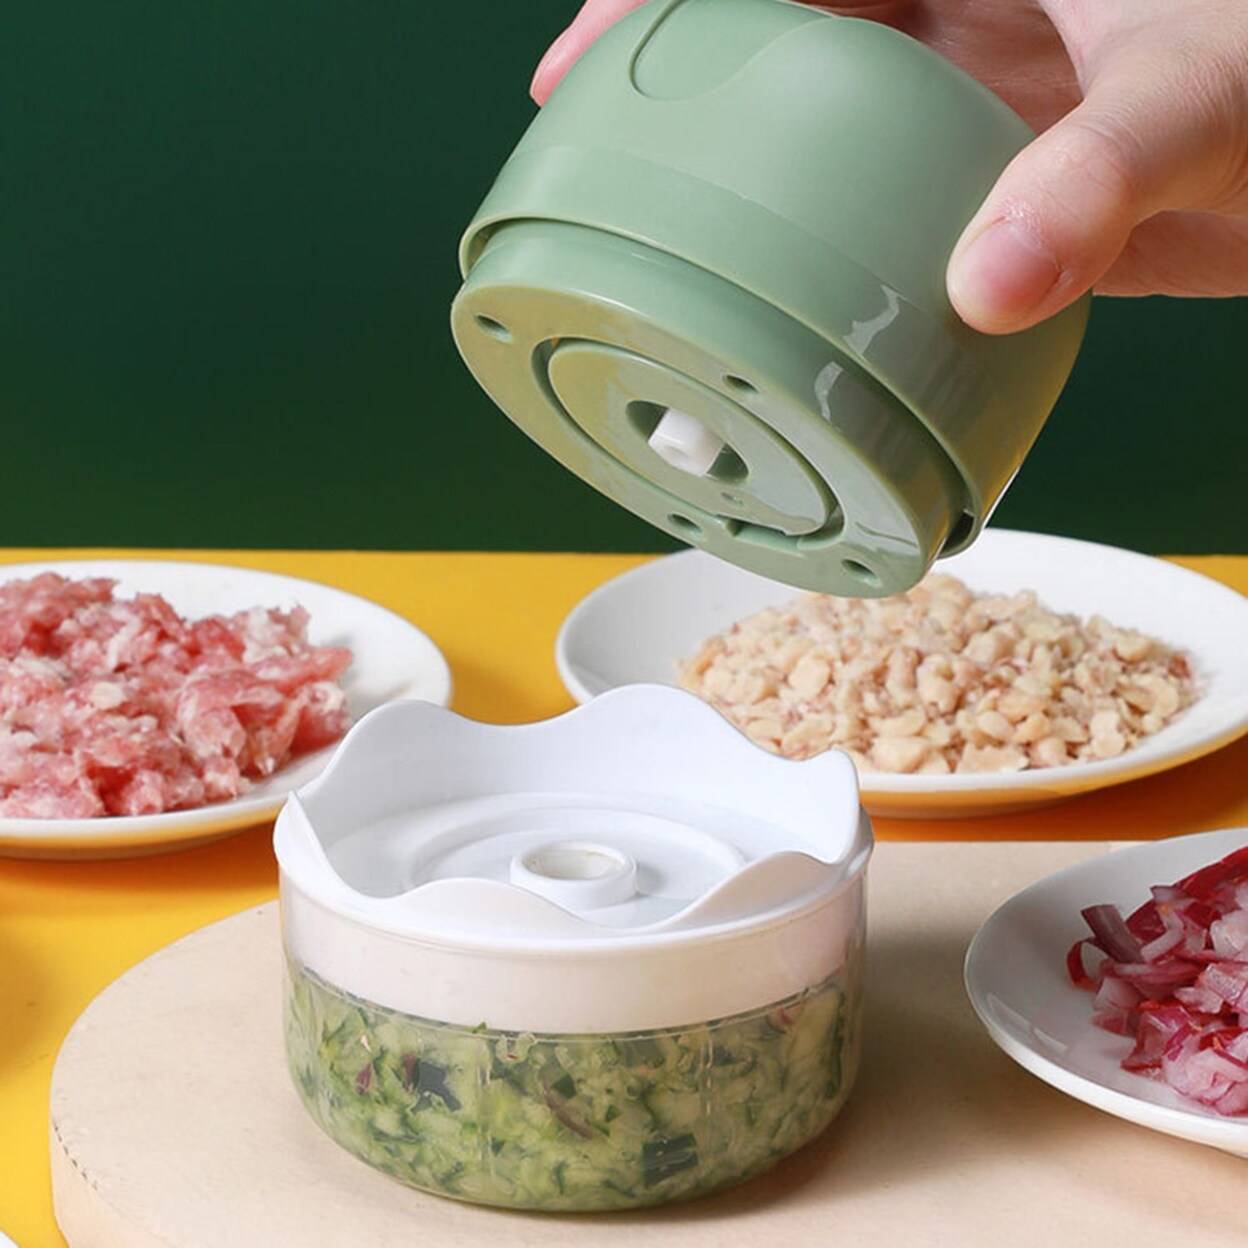 https://ak1.ostkcdn.com/images/products/is/images/direct/68147db2de79eb984438c923033cd88a035e96ef/Electric-Garlic-Press-Wireless-WaterProof-Plastic-Simple-Operation-Electric-Meat-Grinder-Kitchen-Tools.jpg